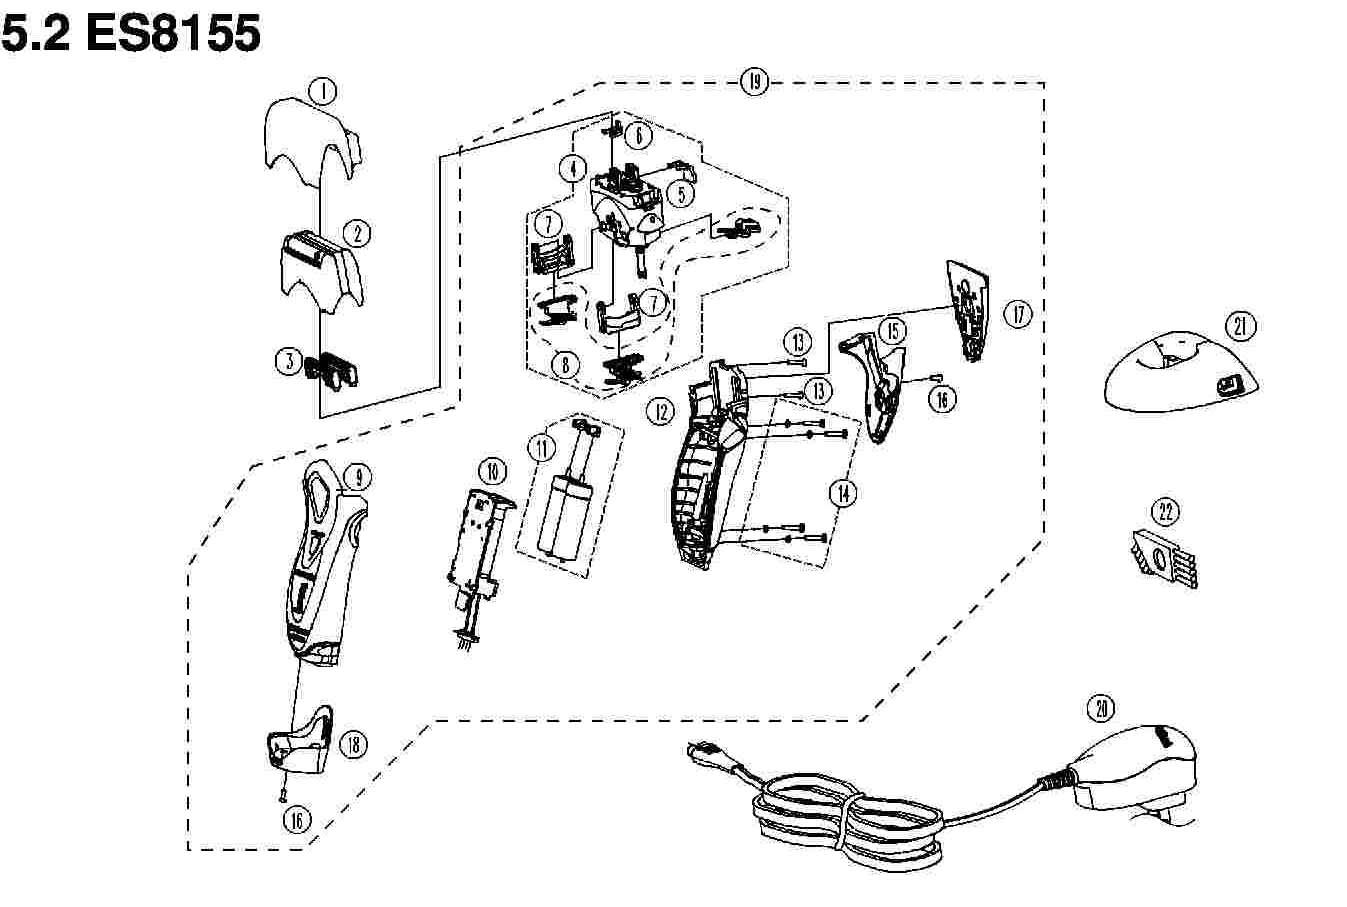 ES-8155: Exploded View